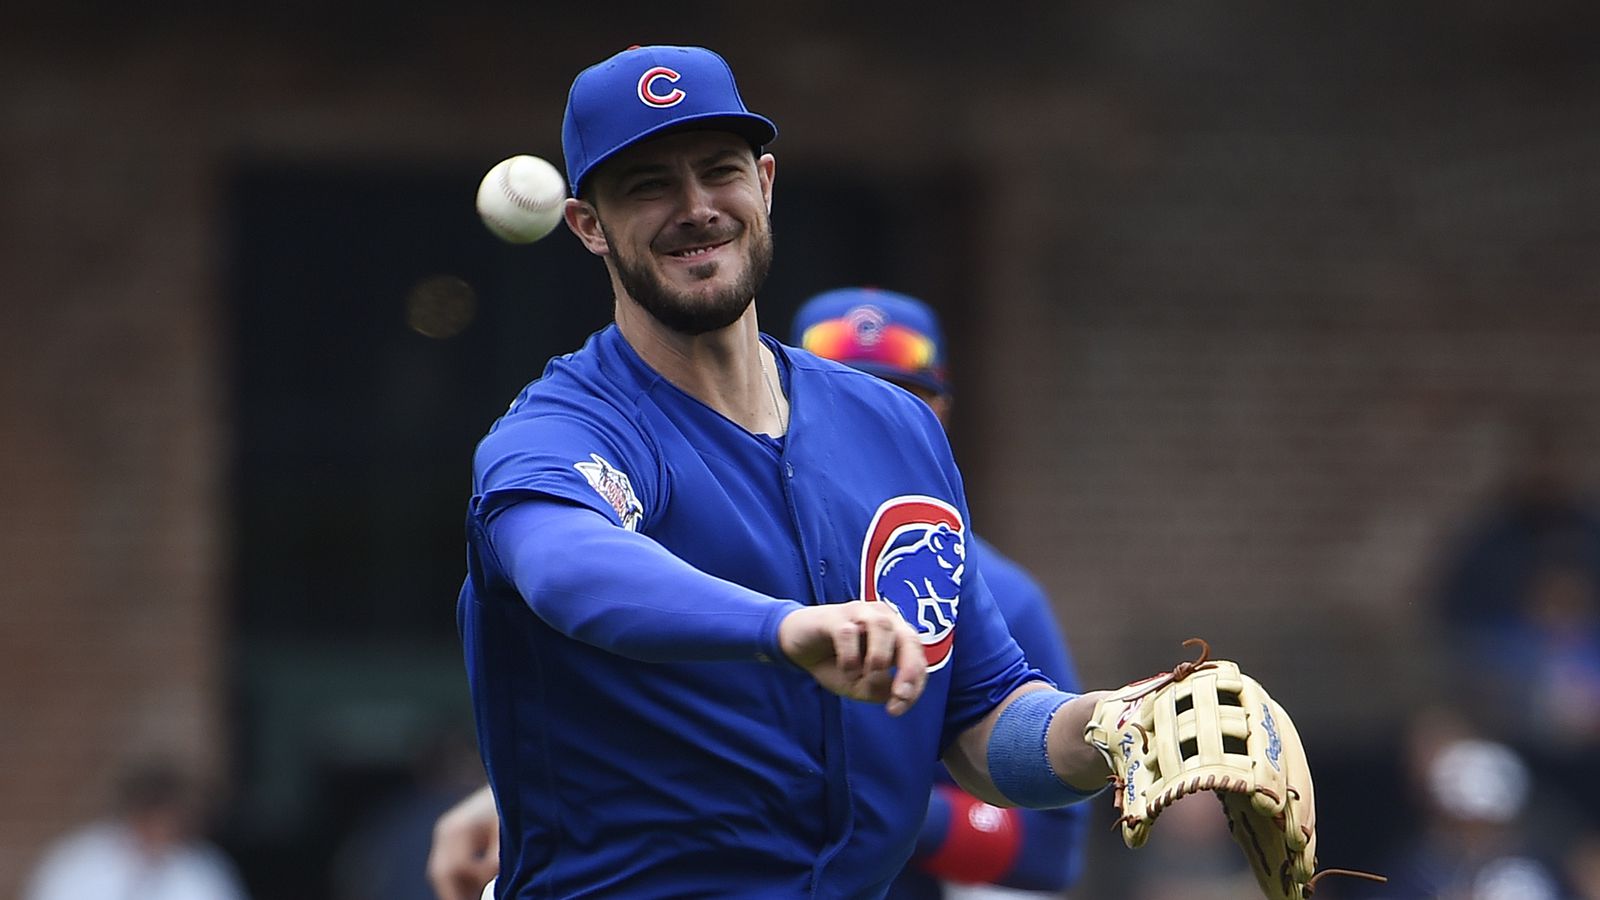 Kris Bryant doesn’t seem interested in an extension with the Cubs.